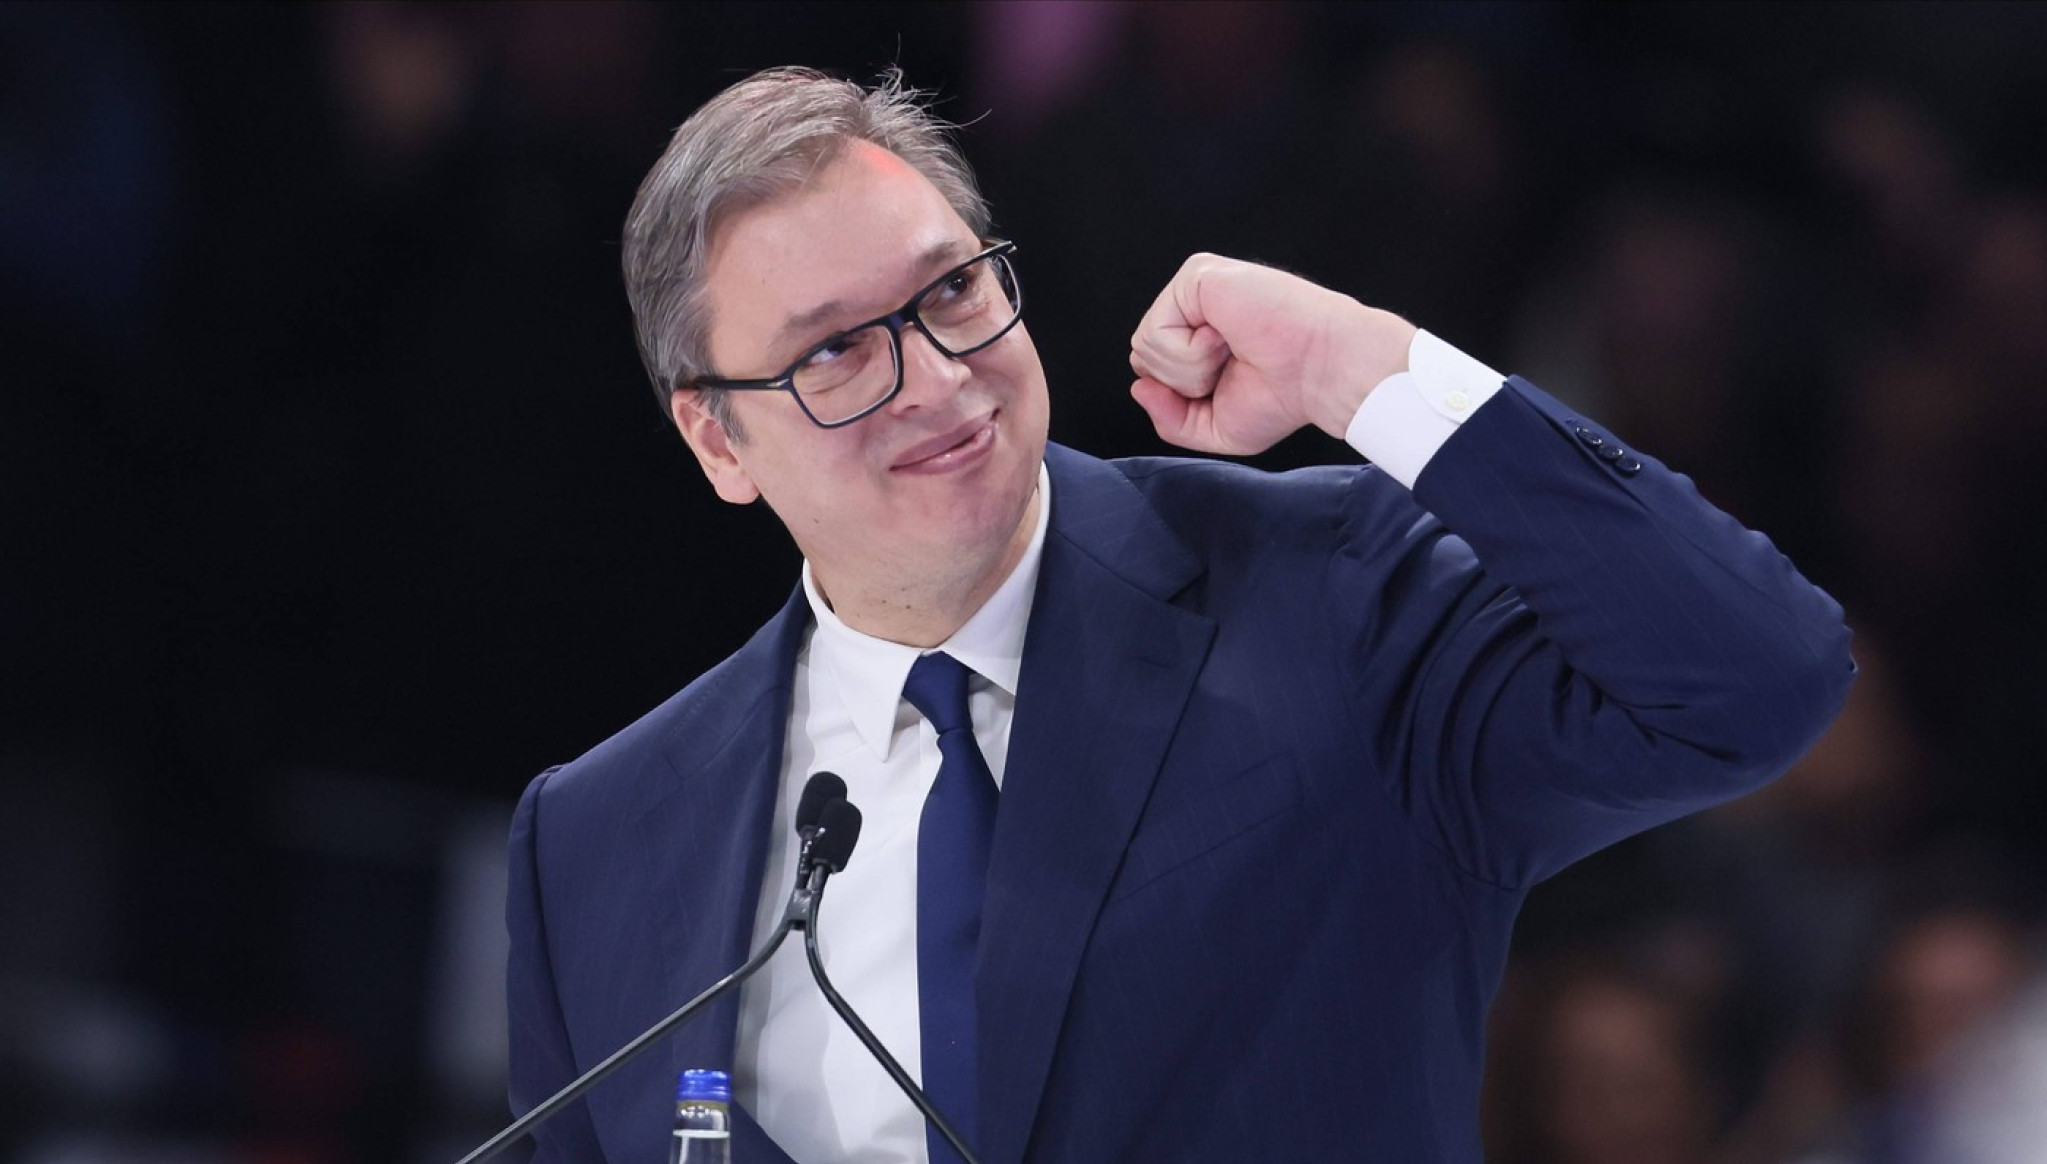 Belgrade goes to vote; Vučić: Serbia does not listen to anyone, except its own people